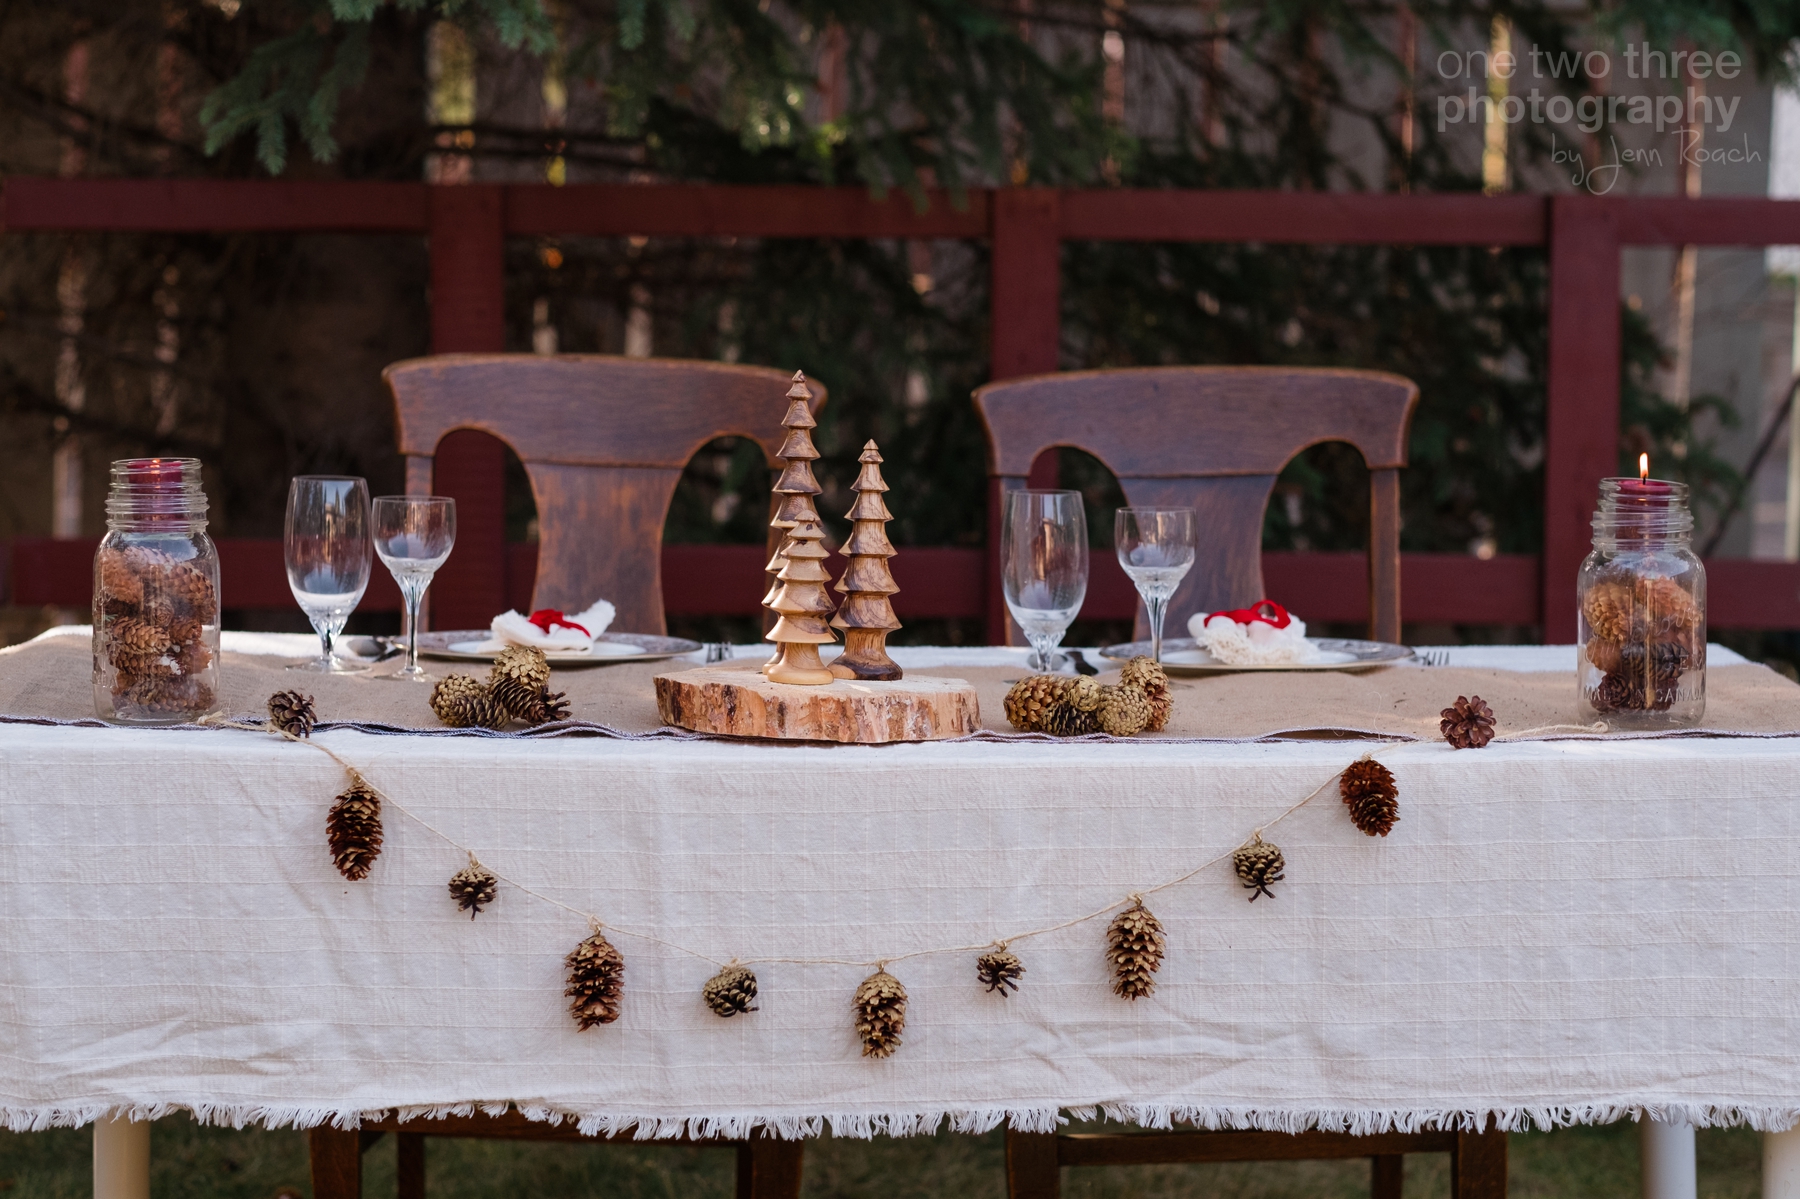 Rustic wedding table settings with pinecones and wood